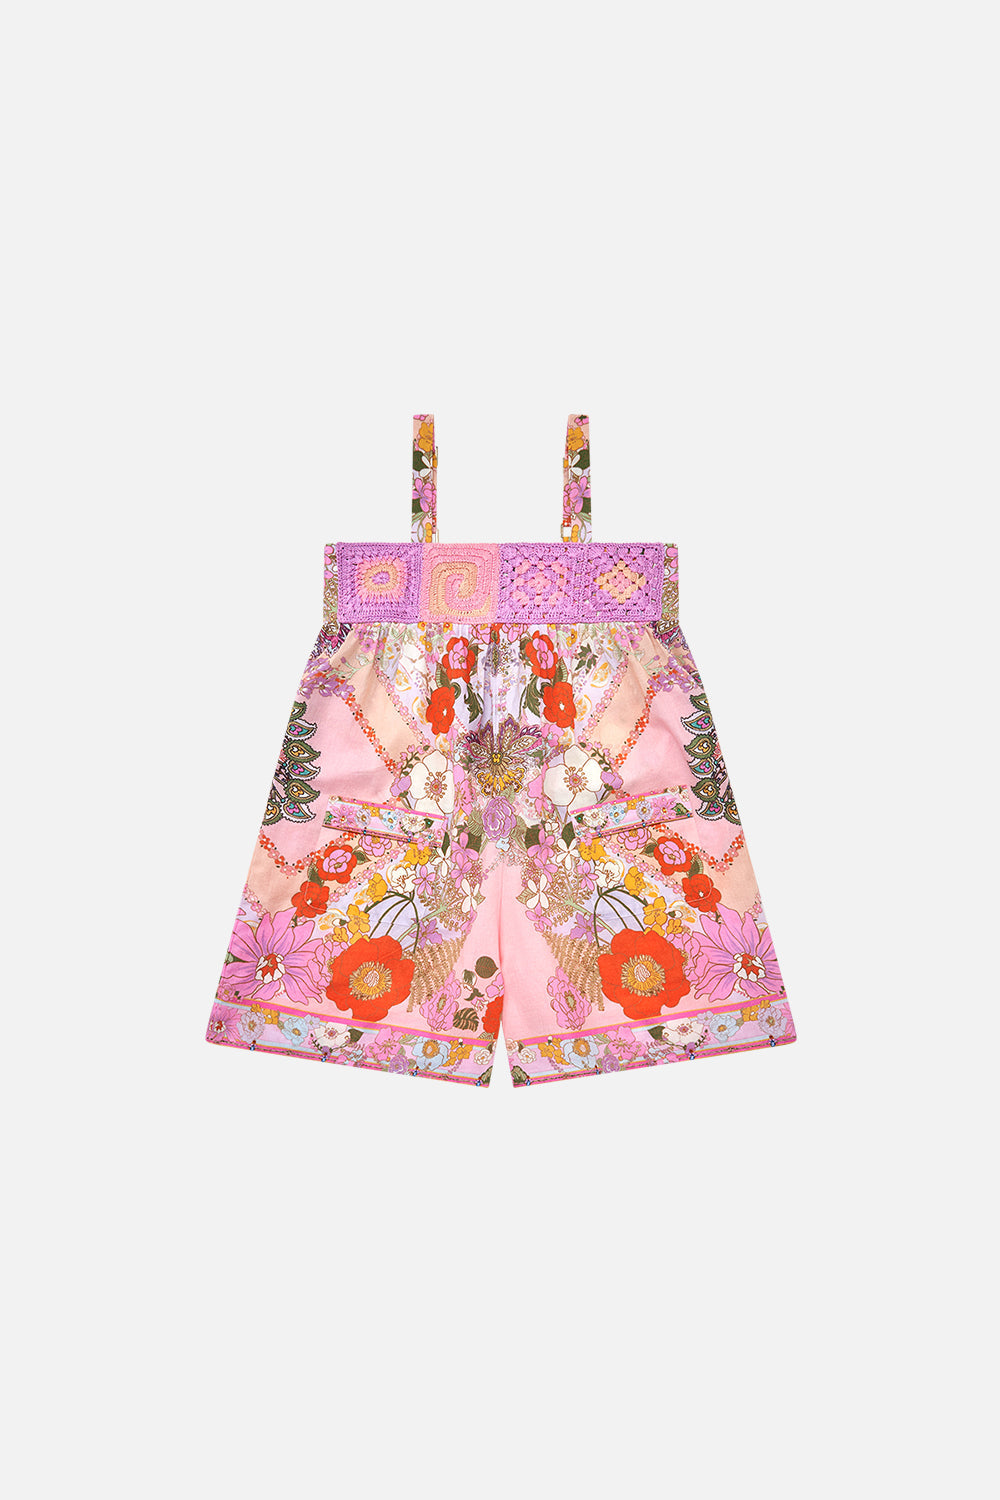 Milla by CAMILLA kids floral print pink playsuit in clever clogs print